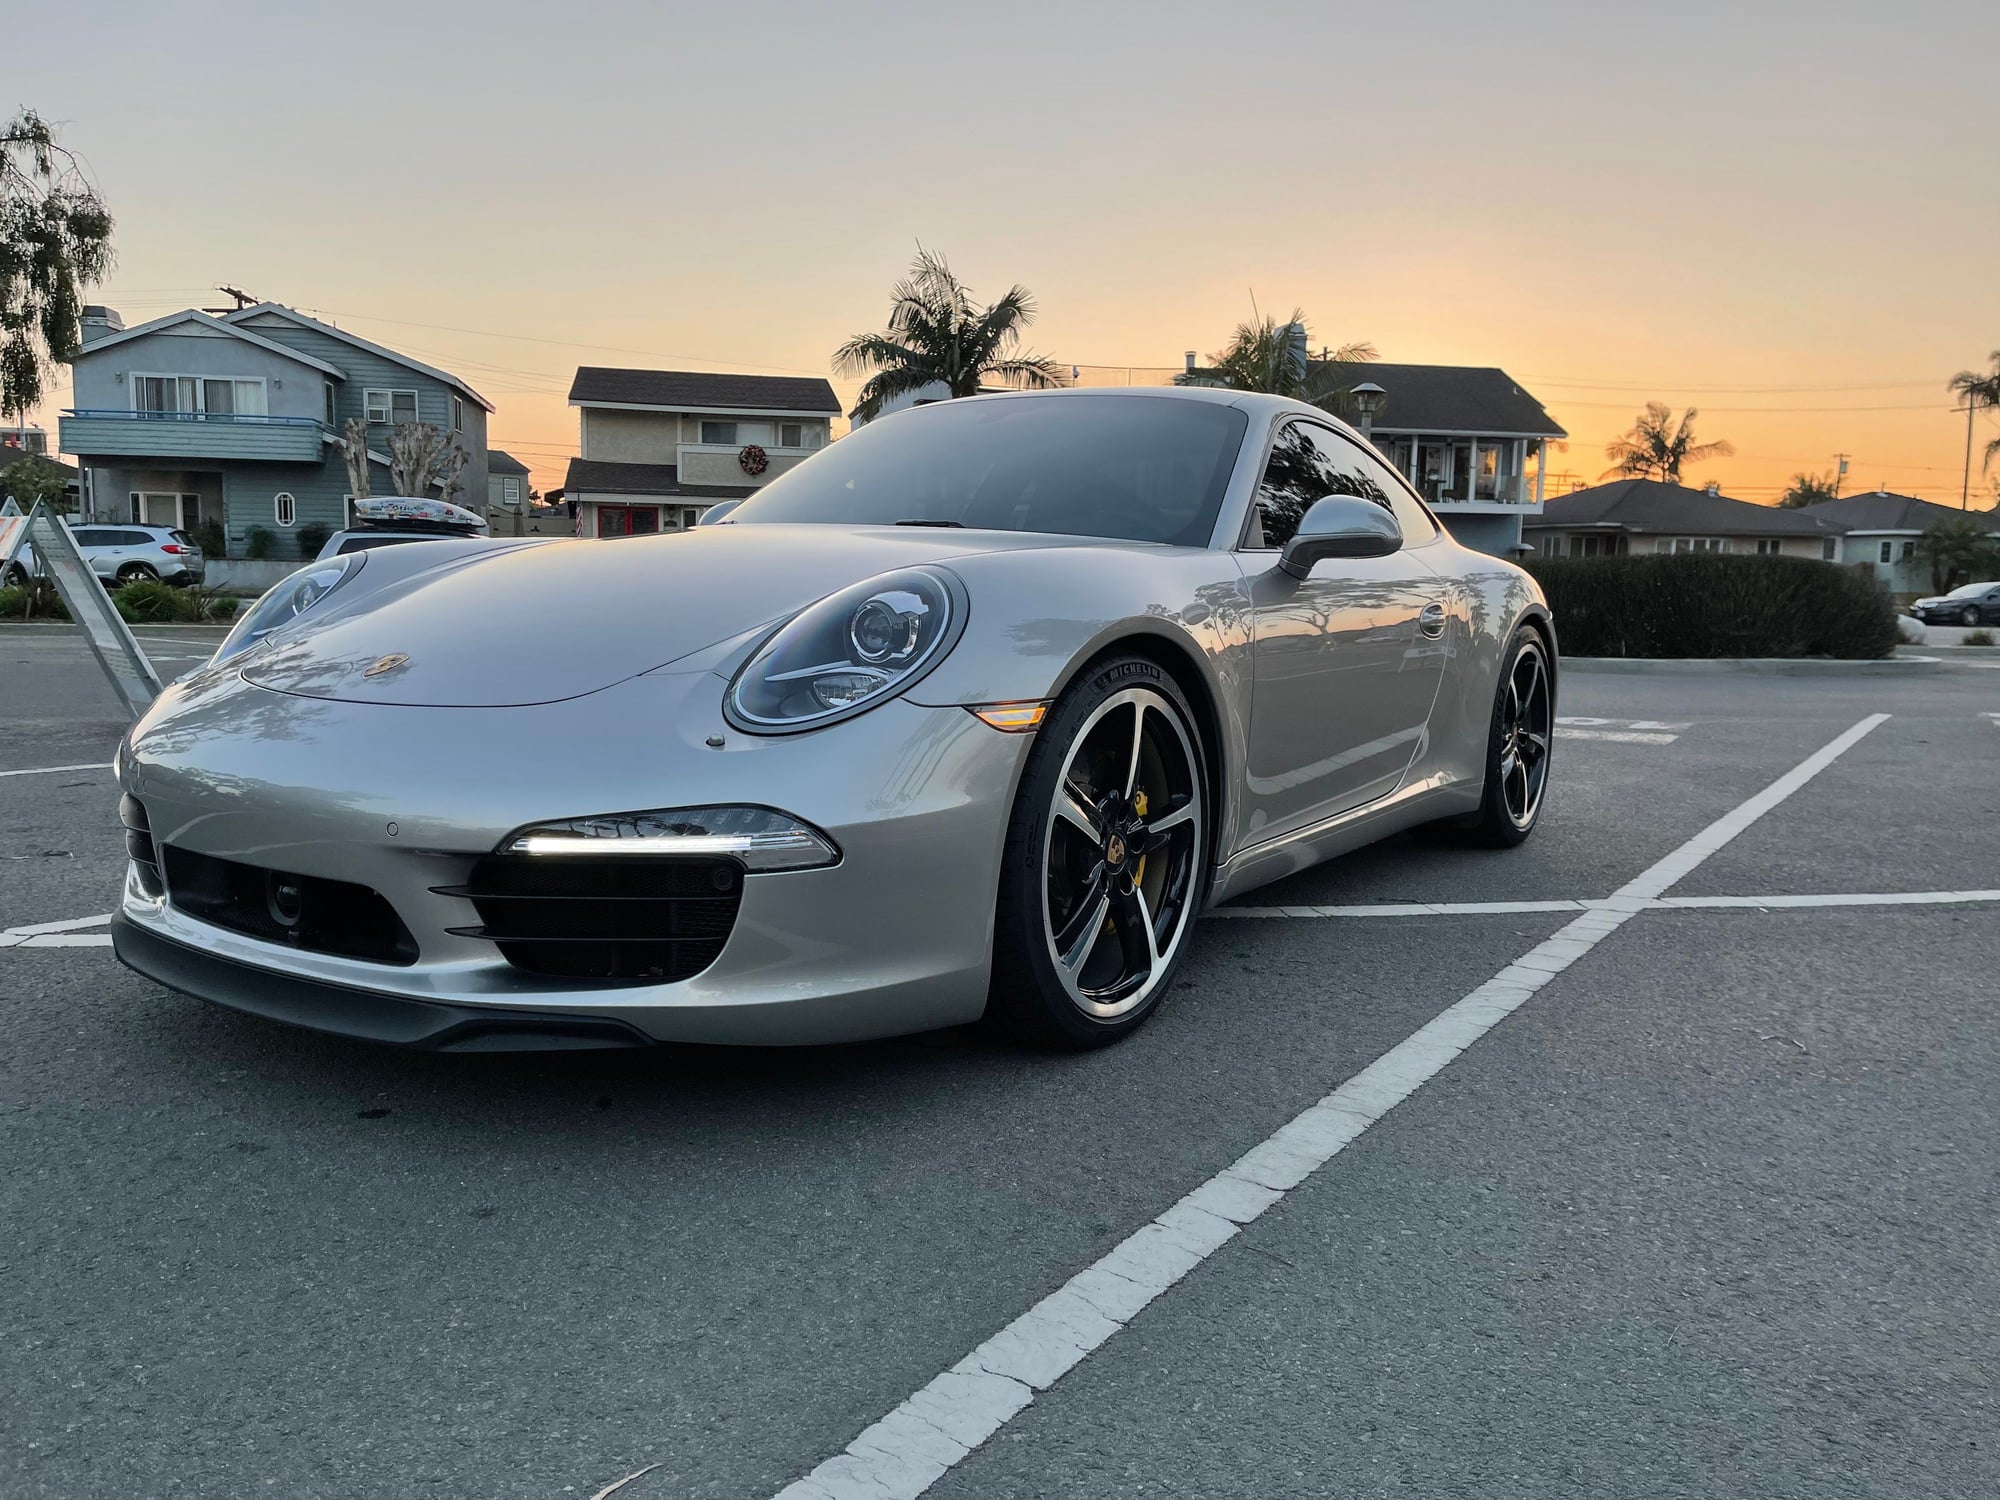 2013 Porsche 911 - 2013 911 C2S PDK PowerKit X51 PCCB Burmester Aerokit $158k MSRP 28k miles - Used - VIN WP0AB2A91DS121363 - 28,000 Miles - 6 cyl - 2WD - Automatic - Coupe - Silver - Seal Beach, CA 90740, United States